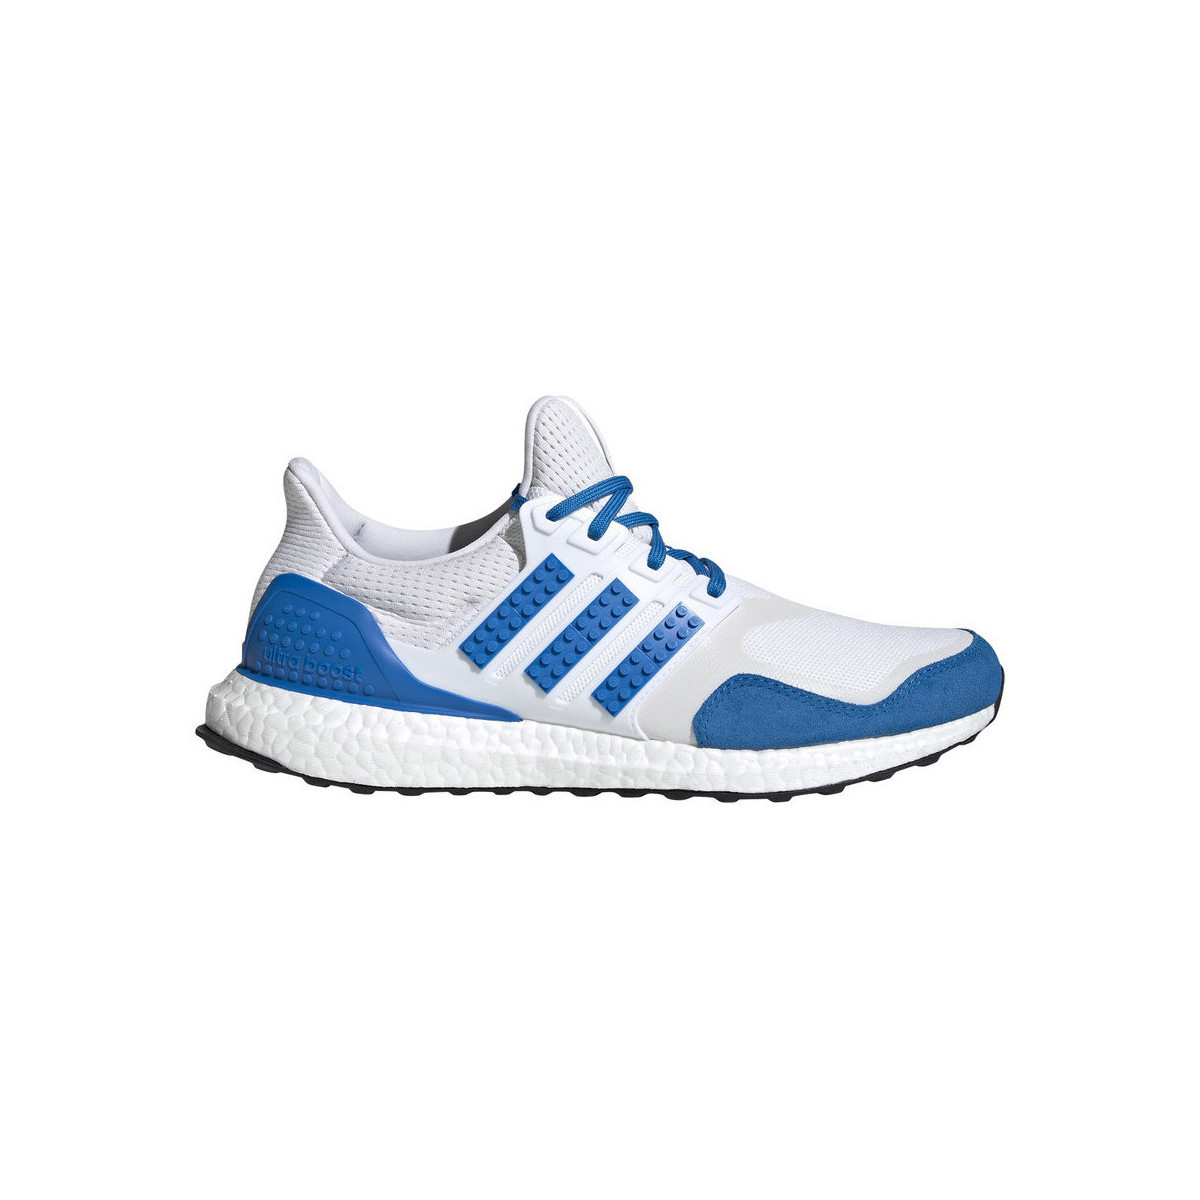 Chaussures Homme political adidas mercury 1985 for sale free trial ULTRABOOST DNA X LEGO Blanc